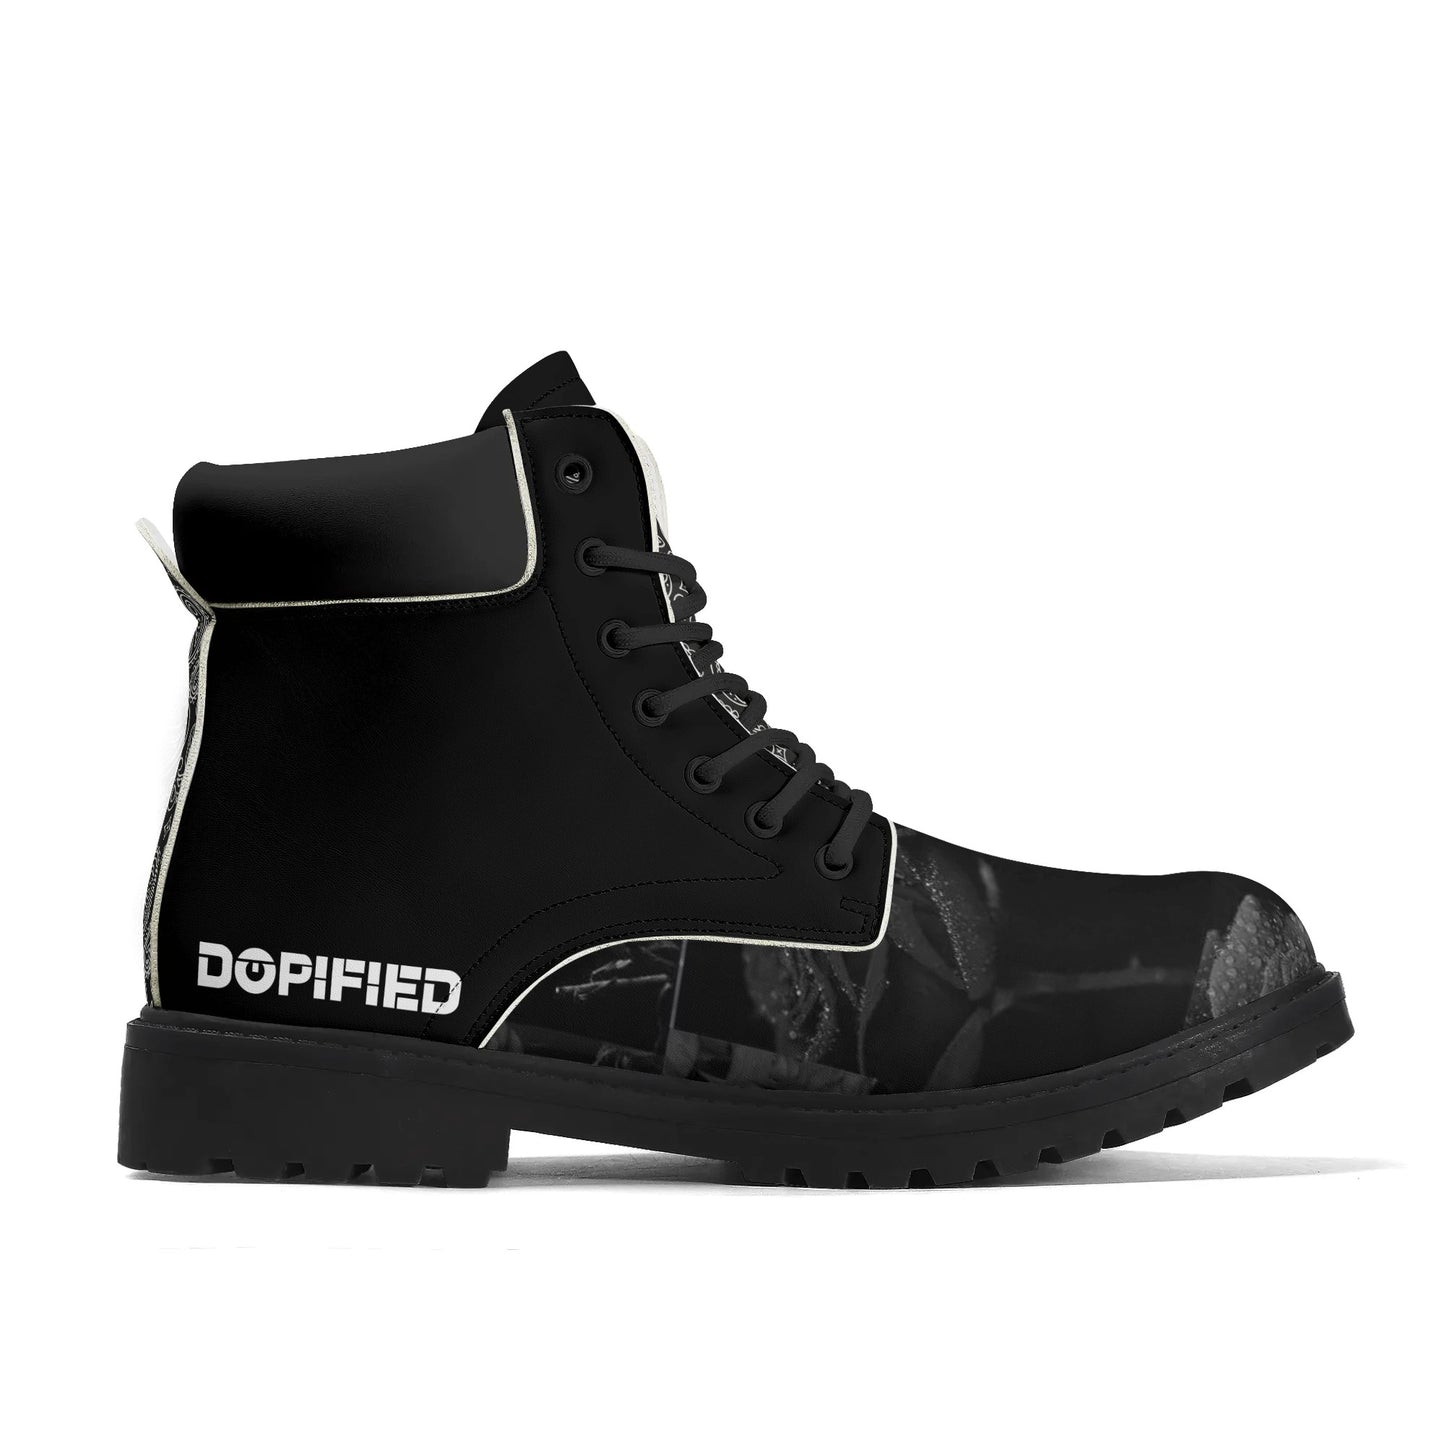 Mens High Quality DOPiFiED Camo/Rose Black Leather All Season Boots